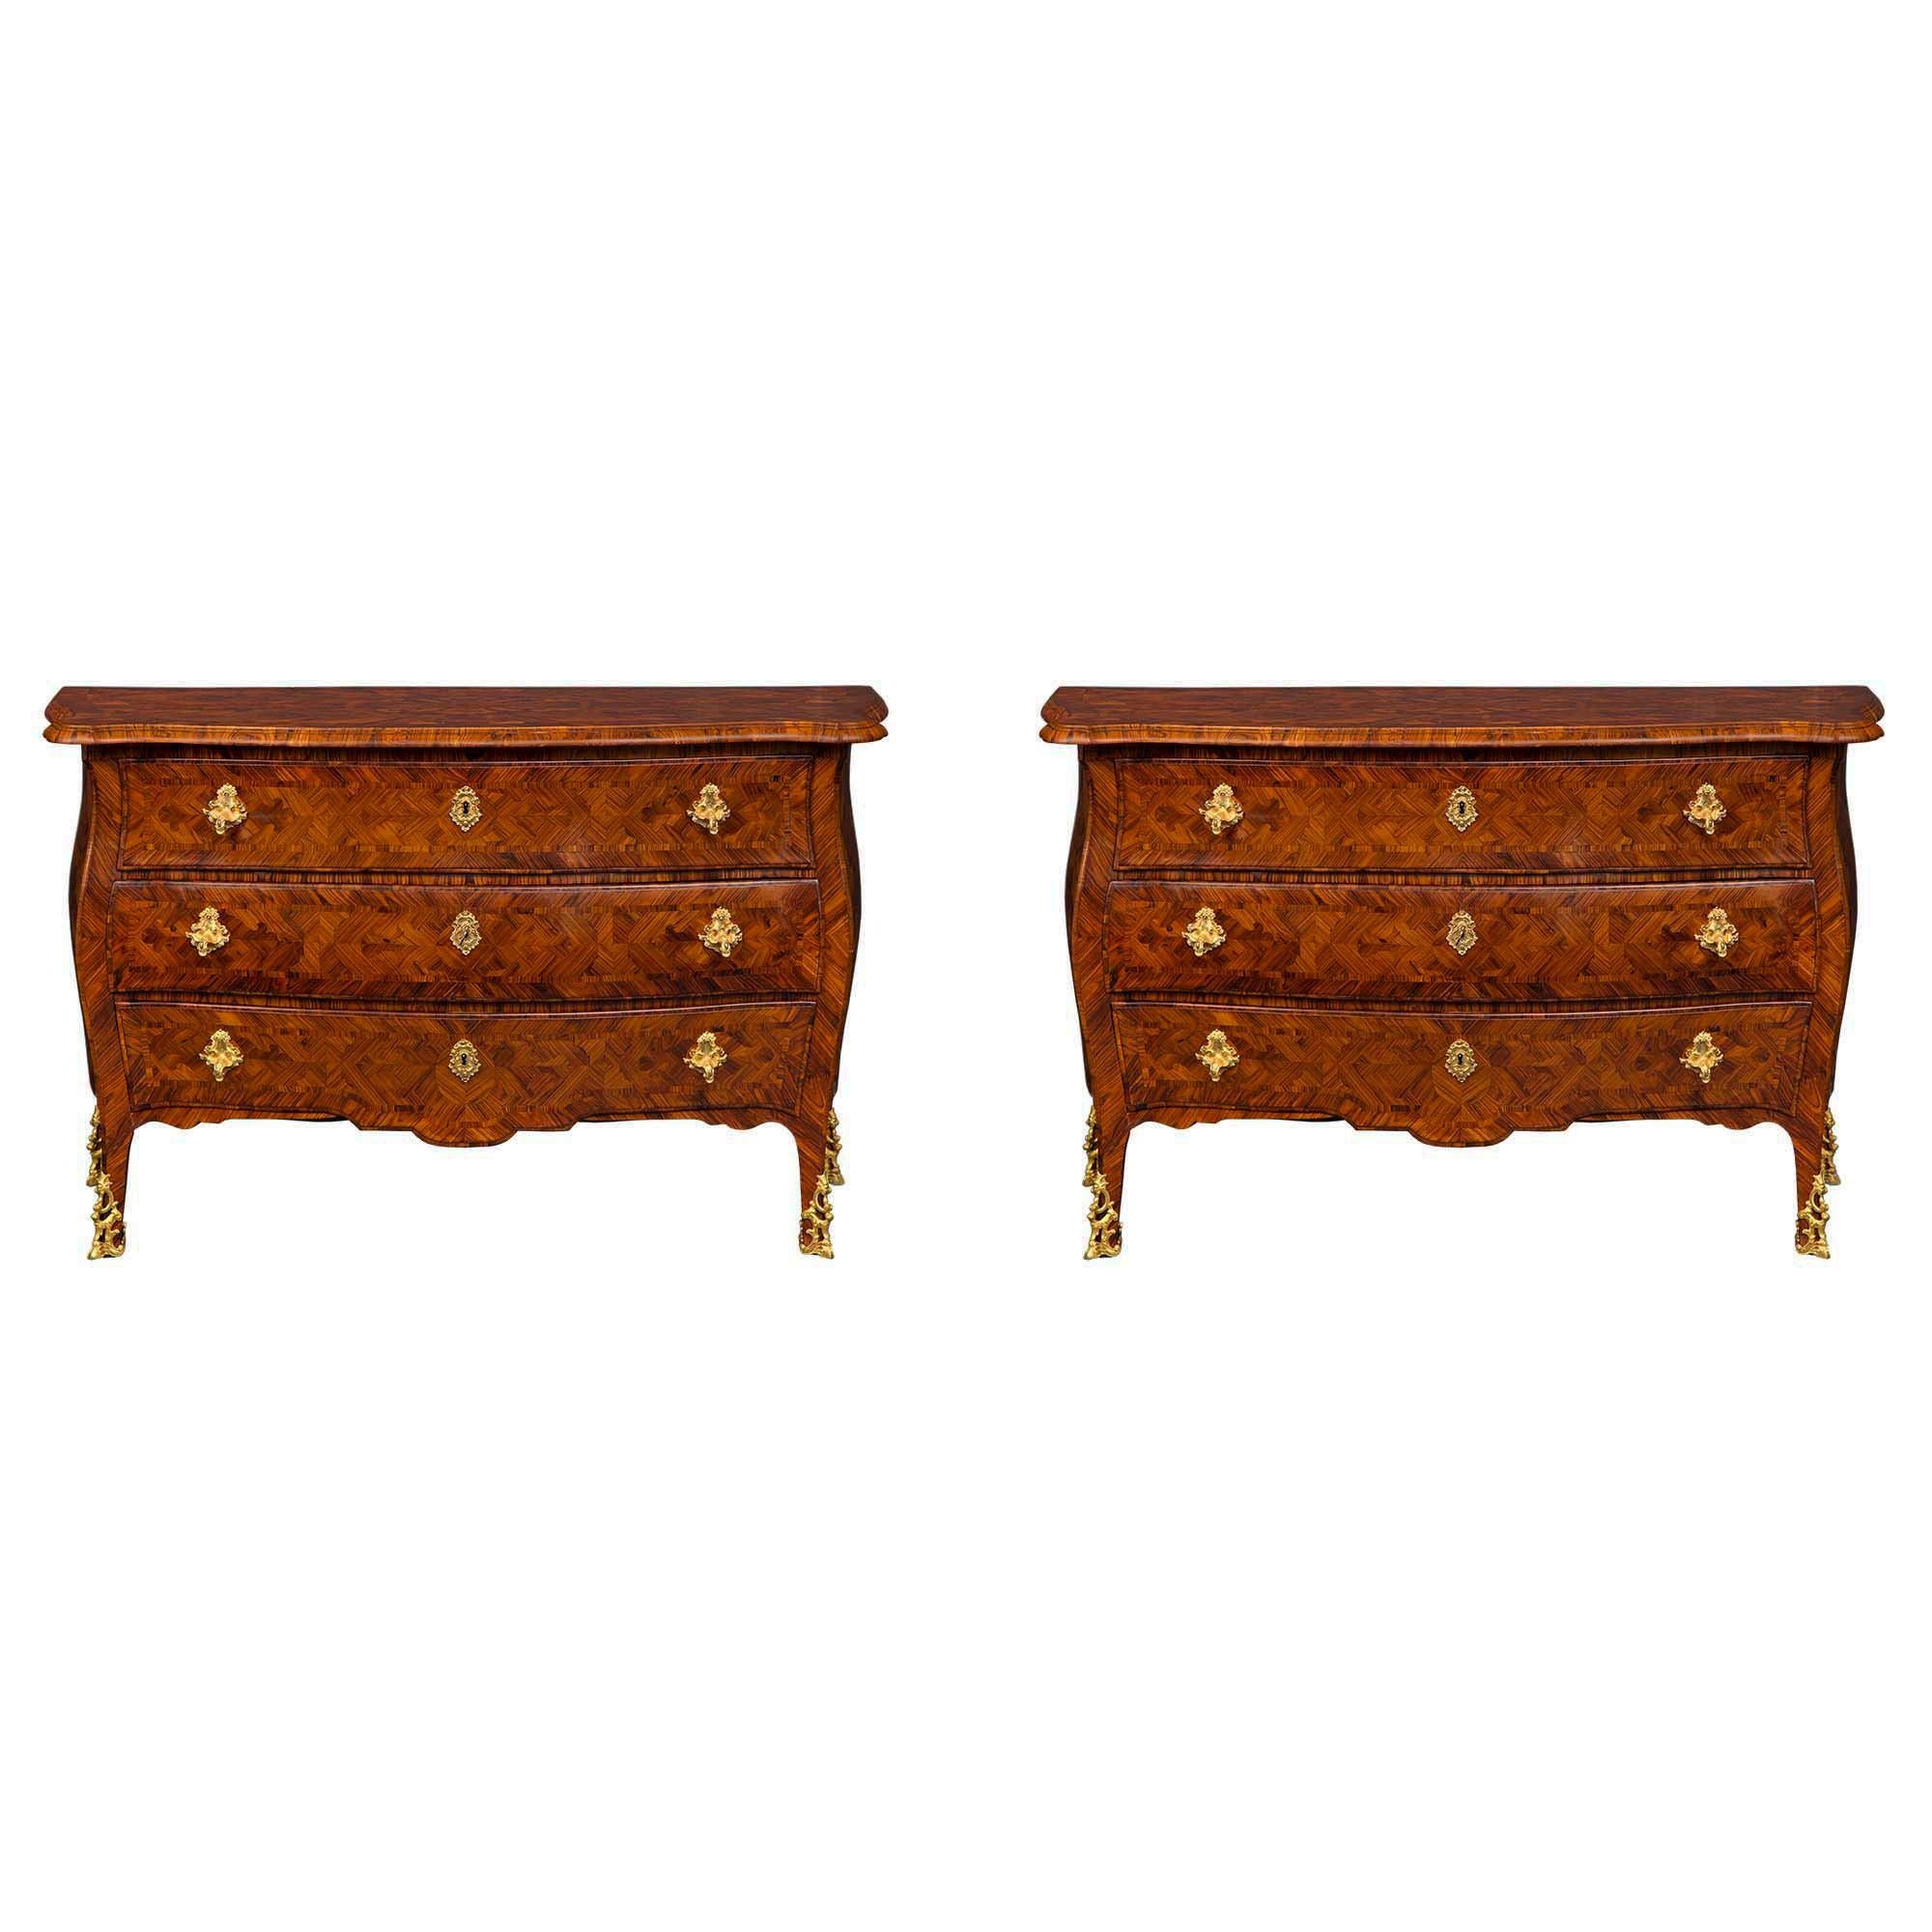 Italian 19th Century Rosewood Parquetry and Ormolu Three-Drawer Chests